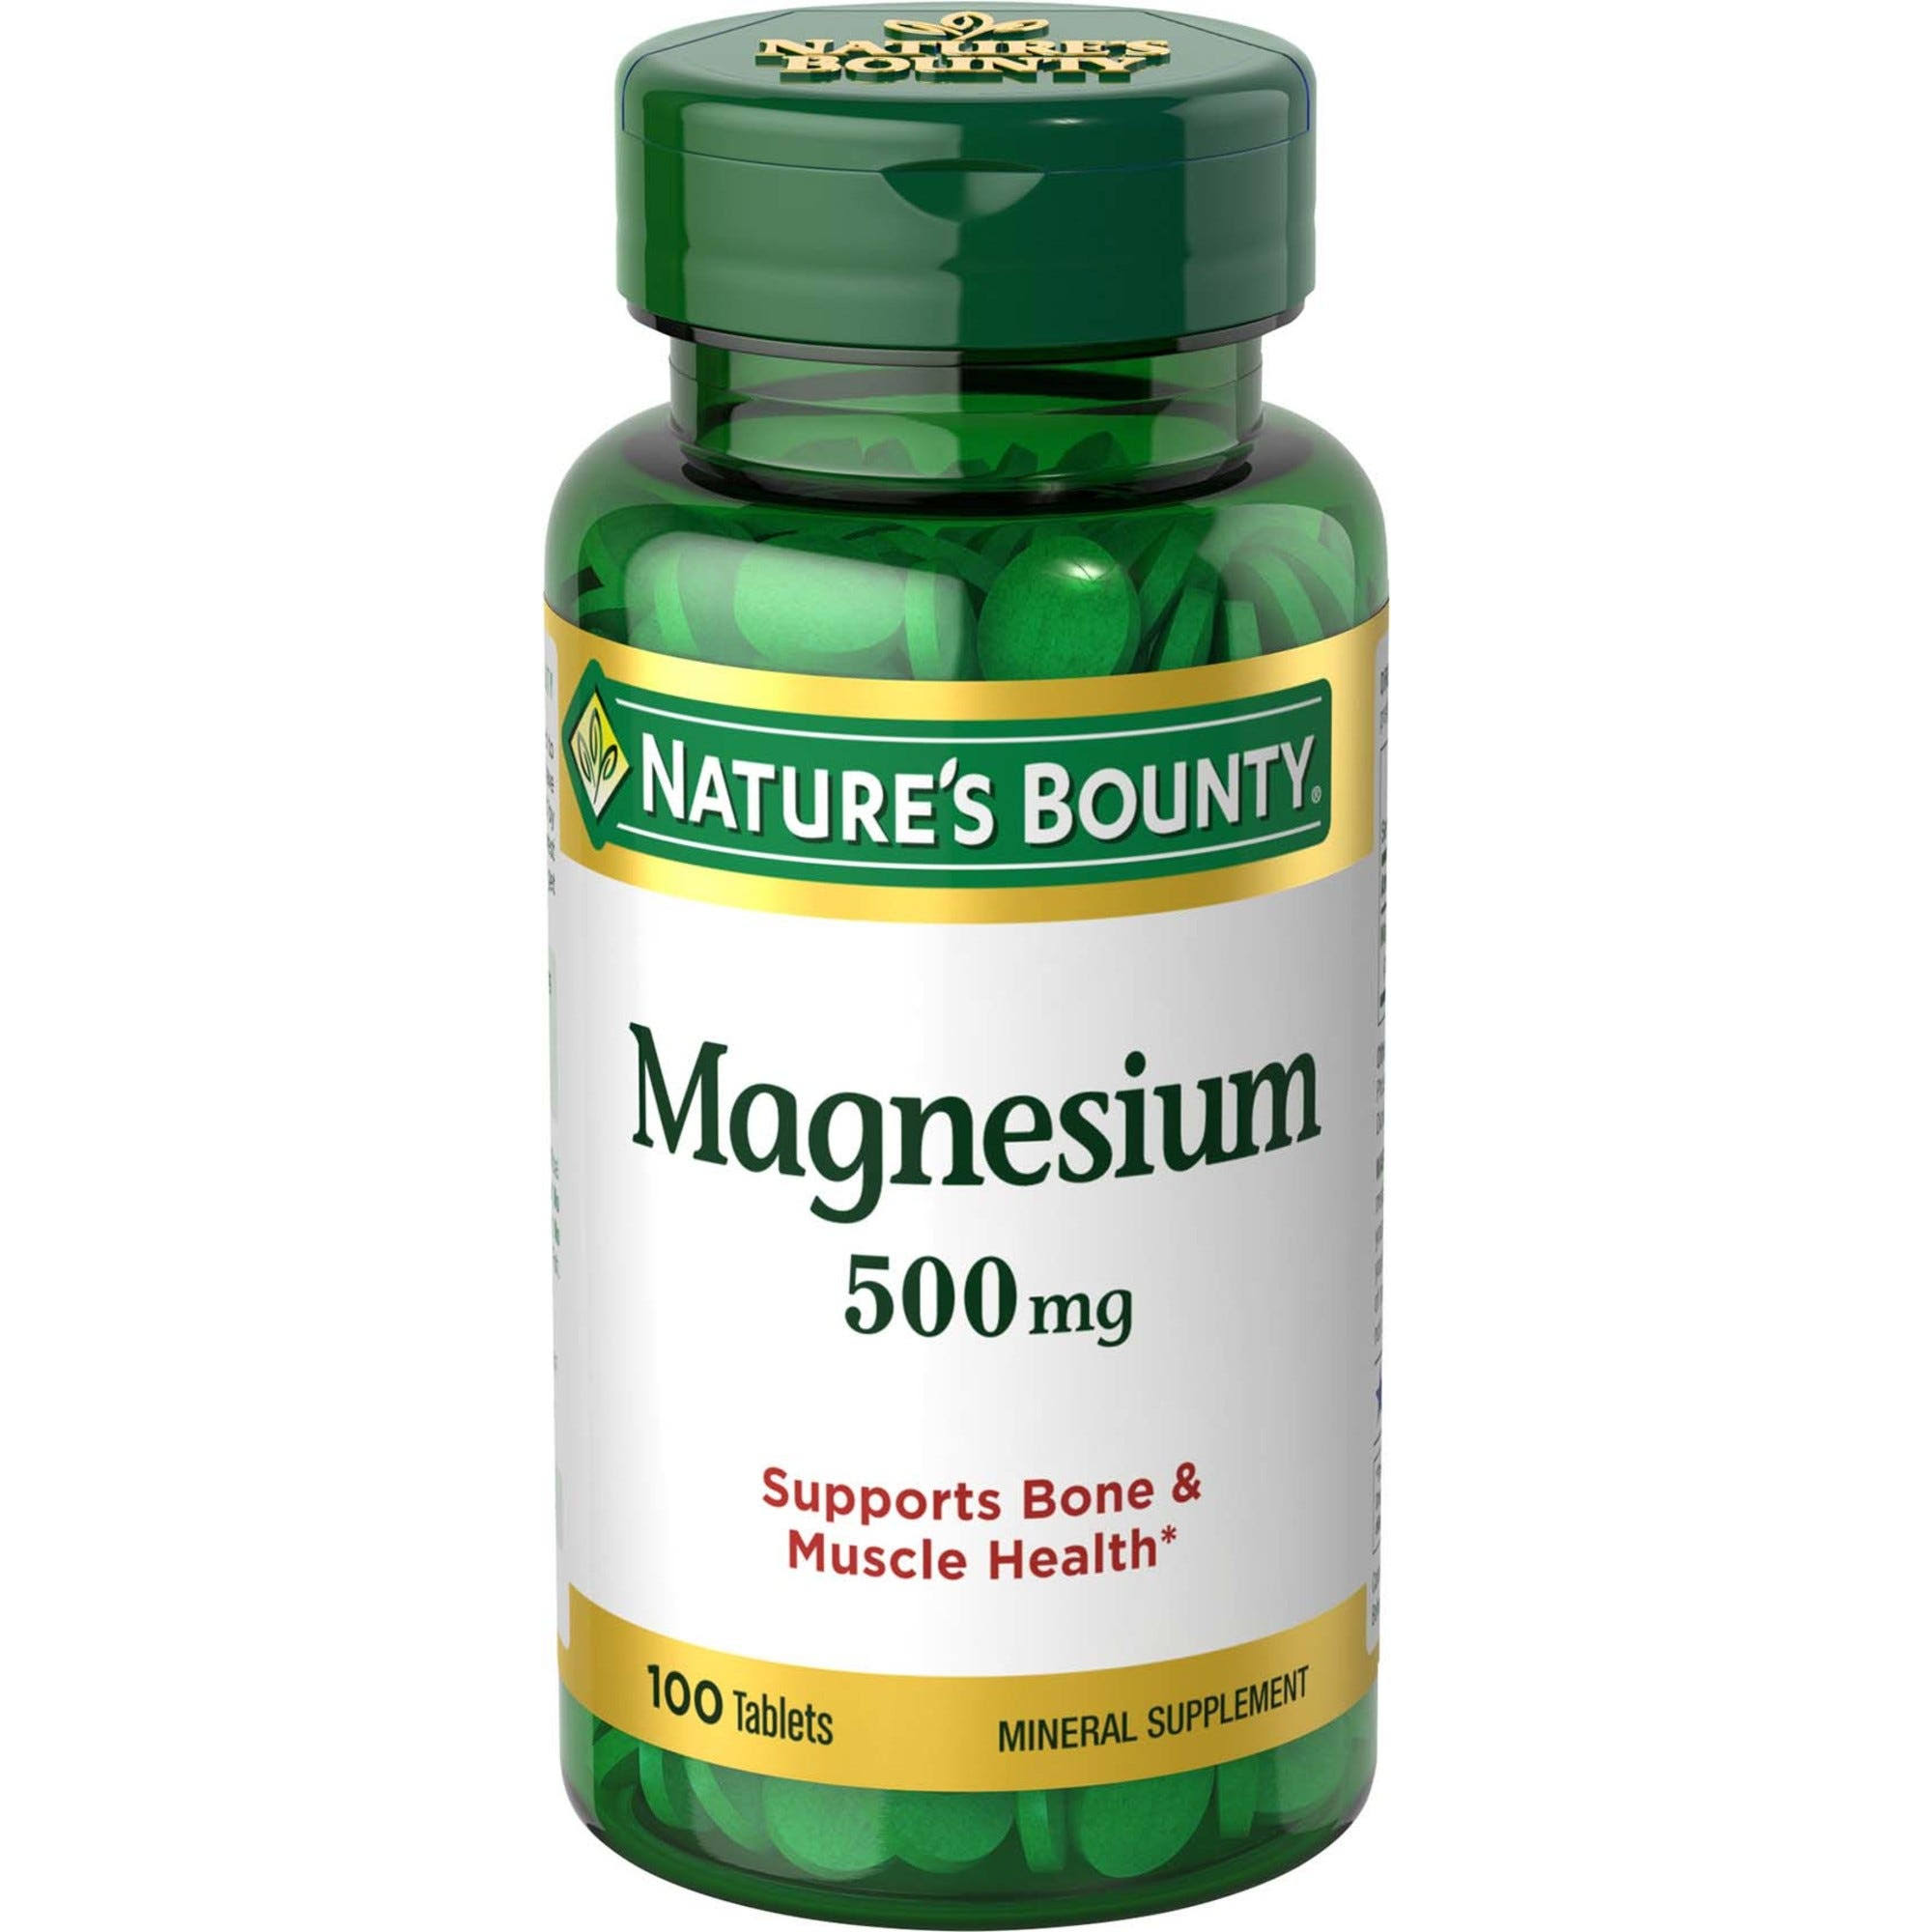 Nature's Bounty Magnesium Mineral Supplement - 500mg, 100 Pack